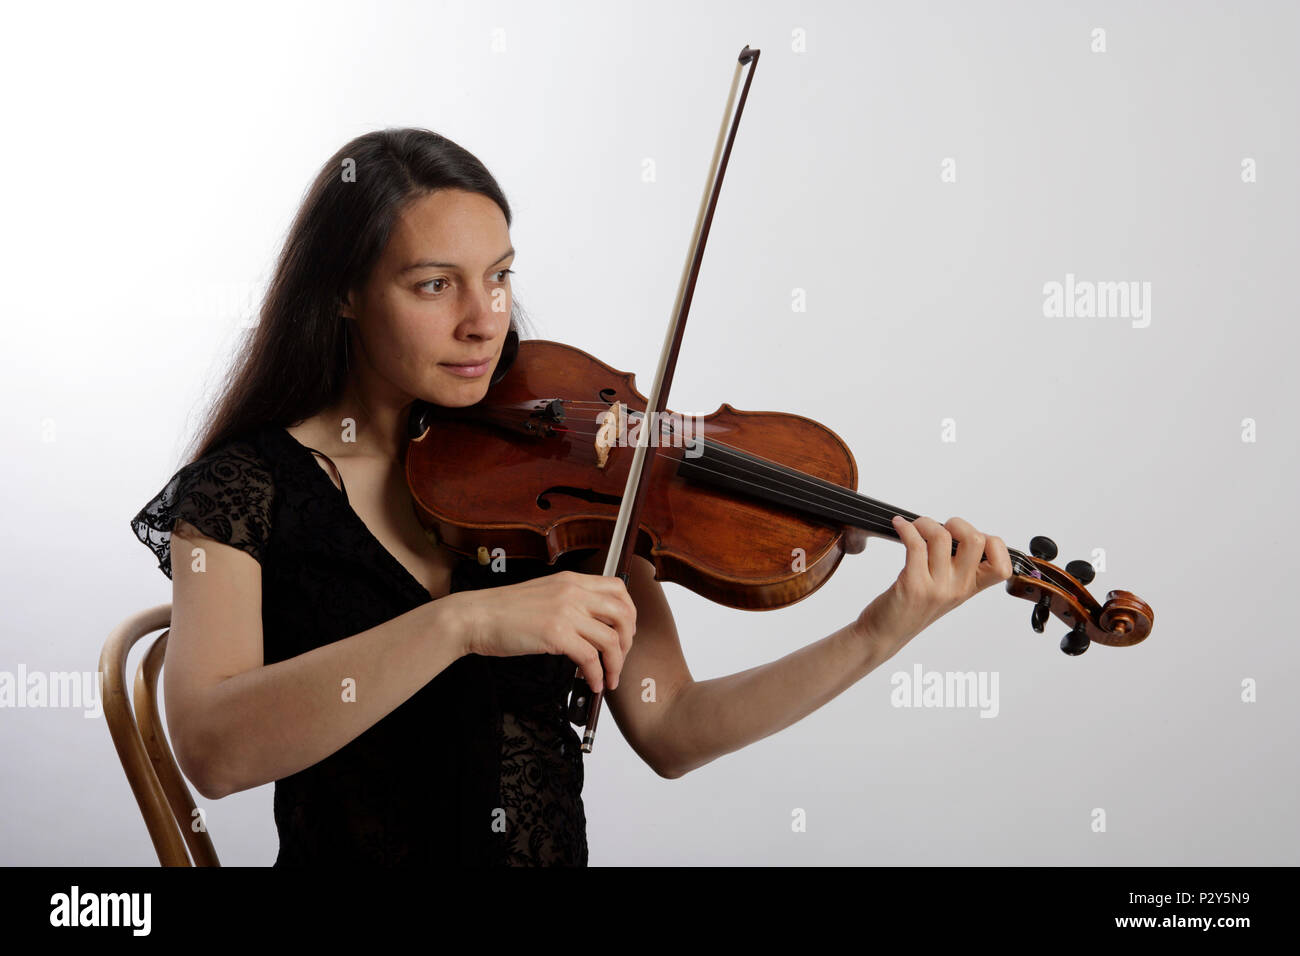 Generic - Viola player playing with the bow Stock Photo - Alamy